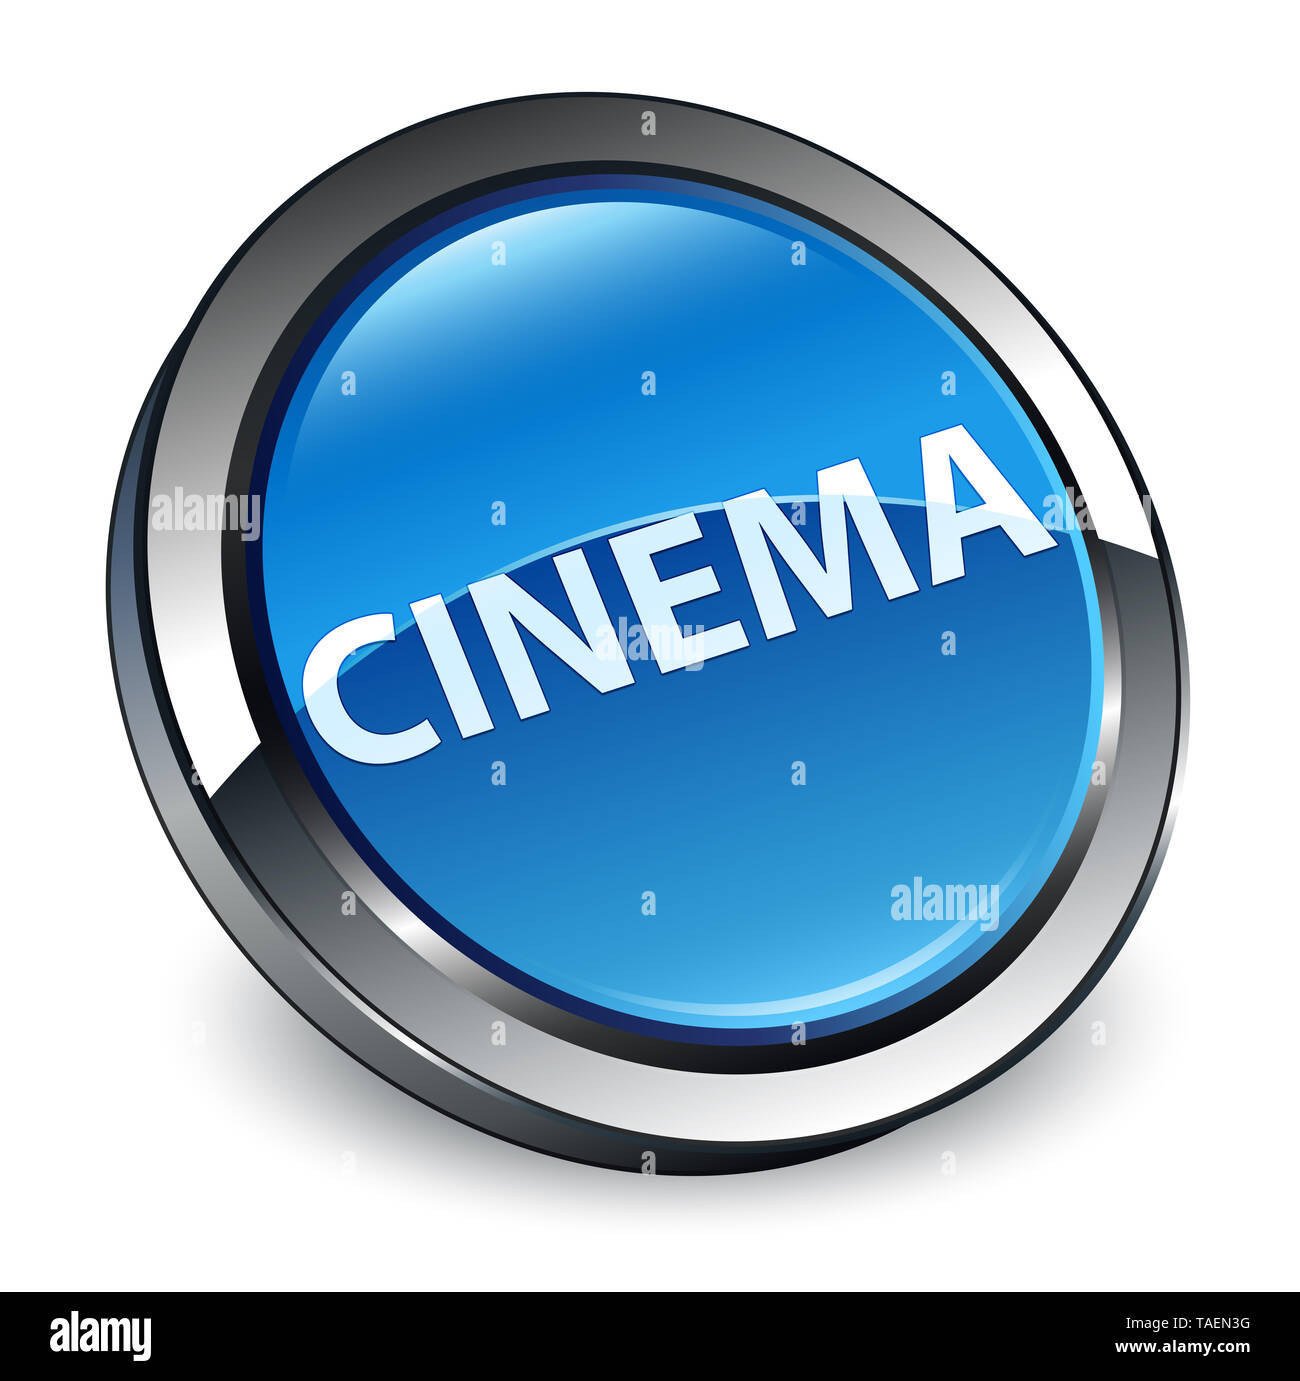 Cinema isolated on 3d blue round button abstract illustration Stock Photo